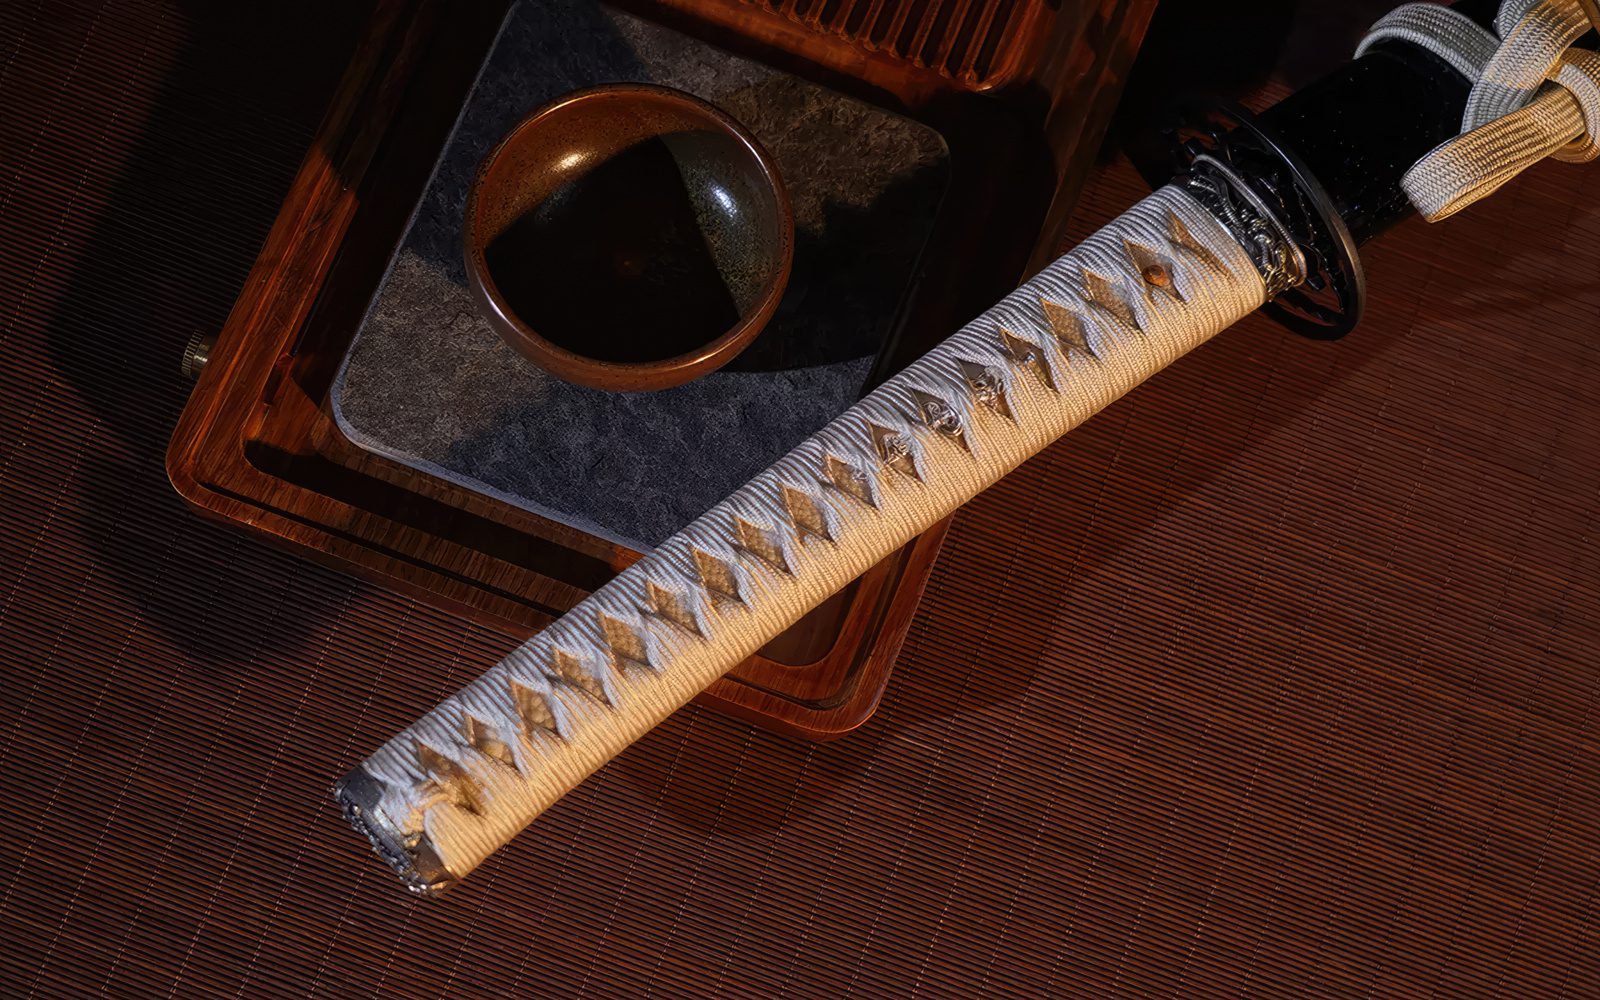 Tsuka: Discovering the Complexities of the Japanese Sword Handle